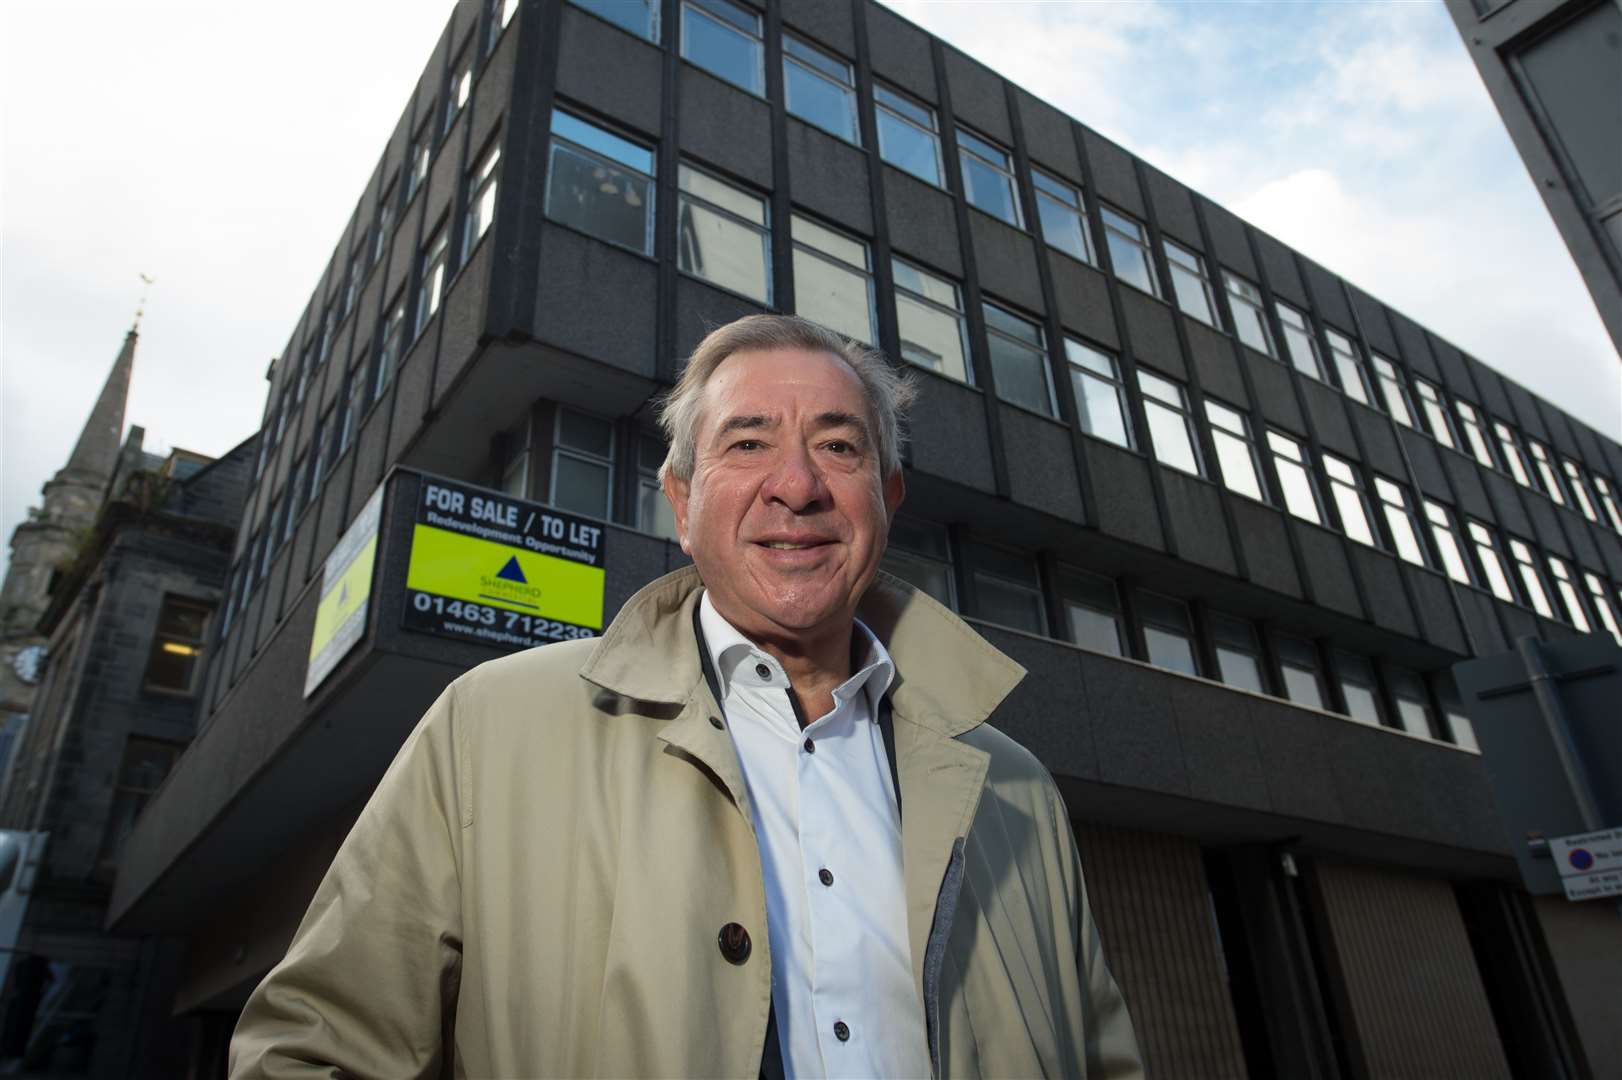 Tony Story, owner of the Kingsmills Hotel, at the building which he hopes to convert into a new hotel. Picture: Callum Mackay